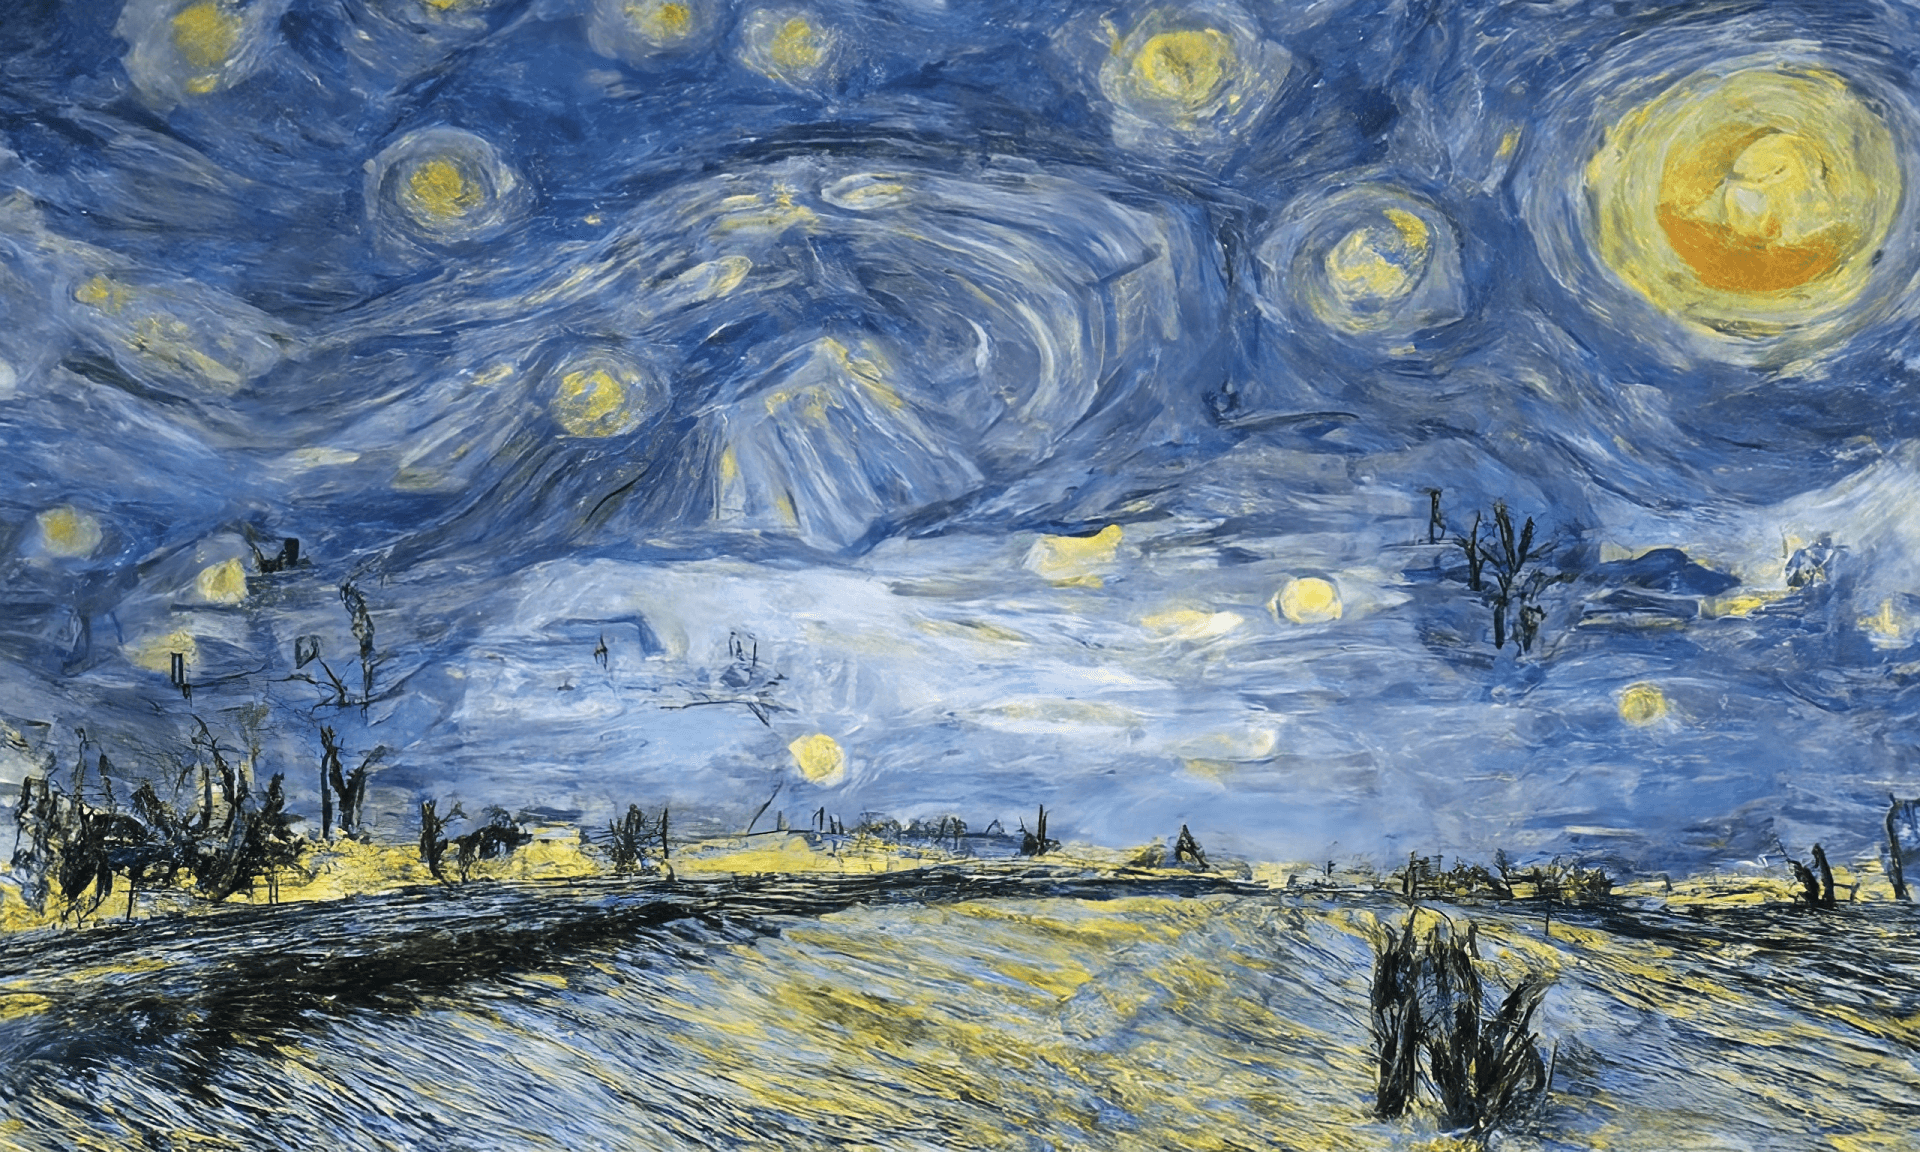 The starry night [2,0015] - The imaginary entity